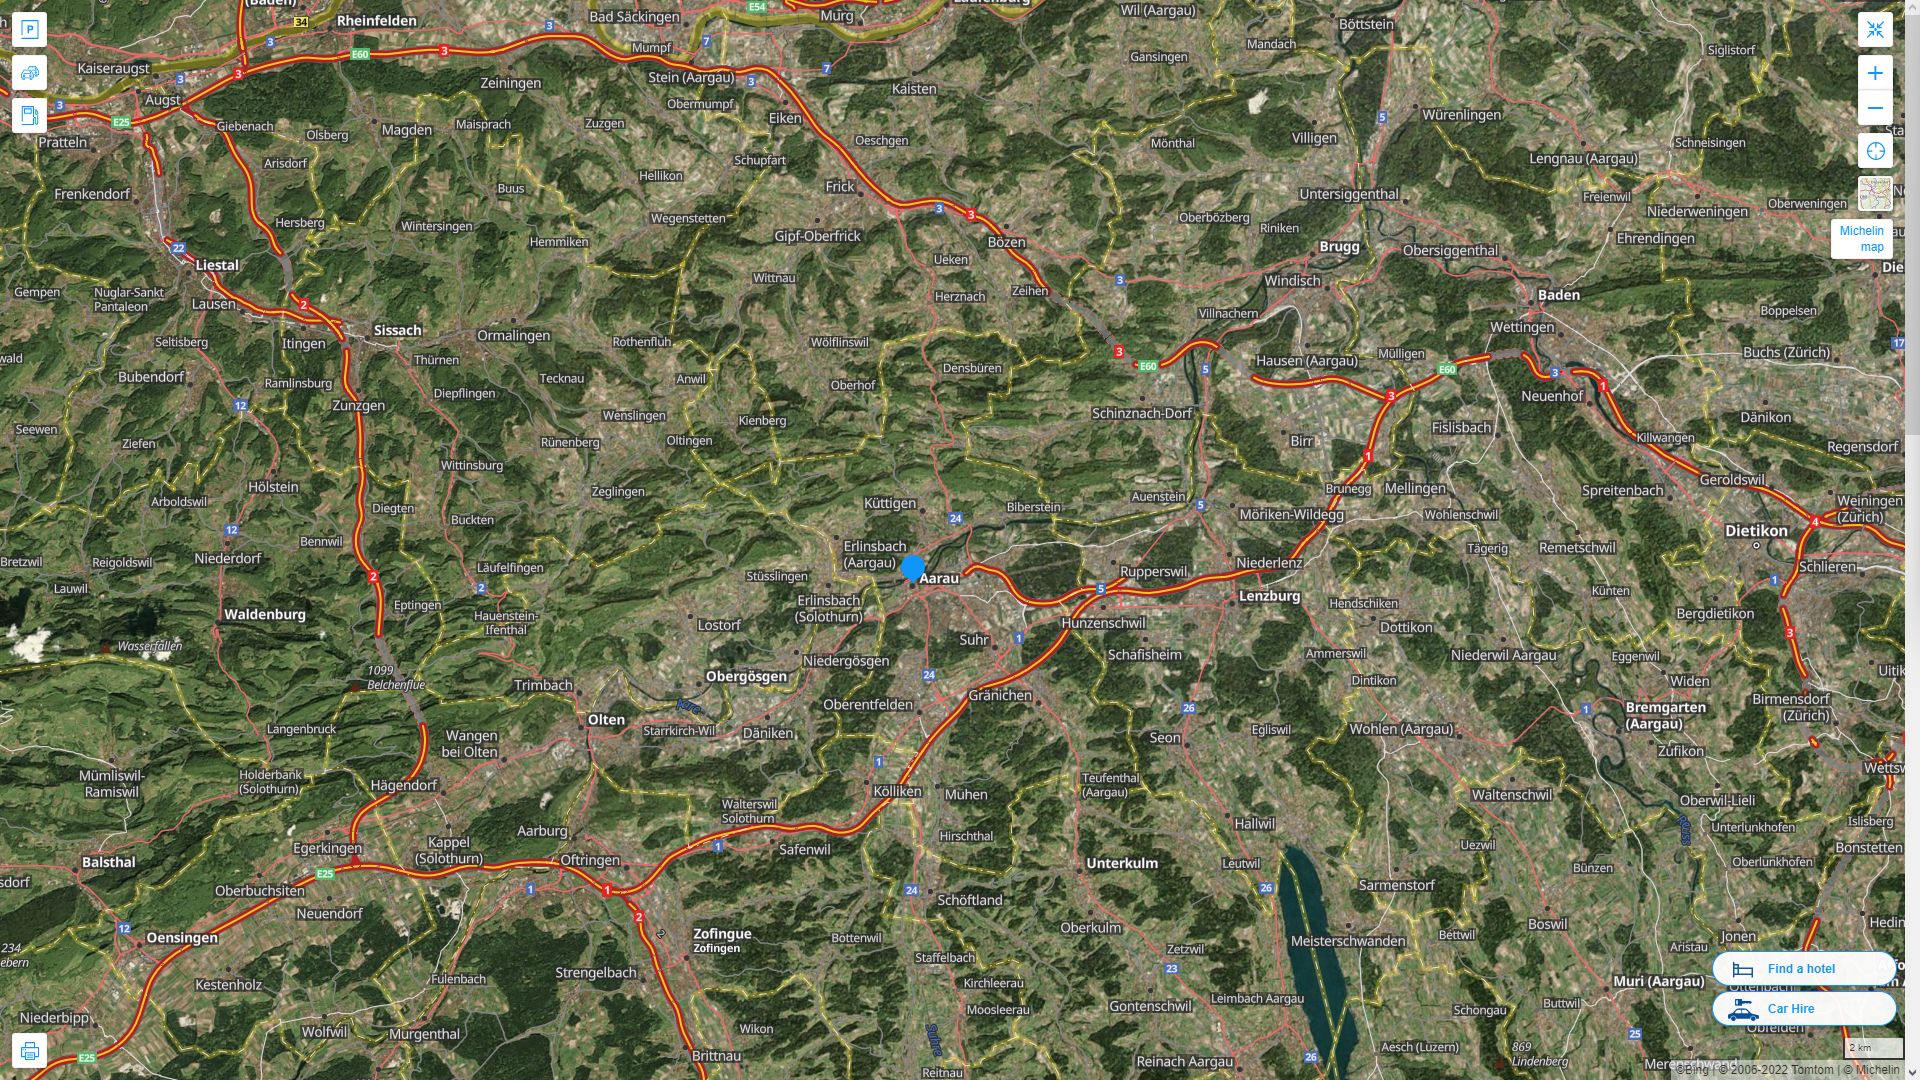 Aarau Highway and Road Map with Satellite View